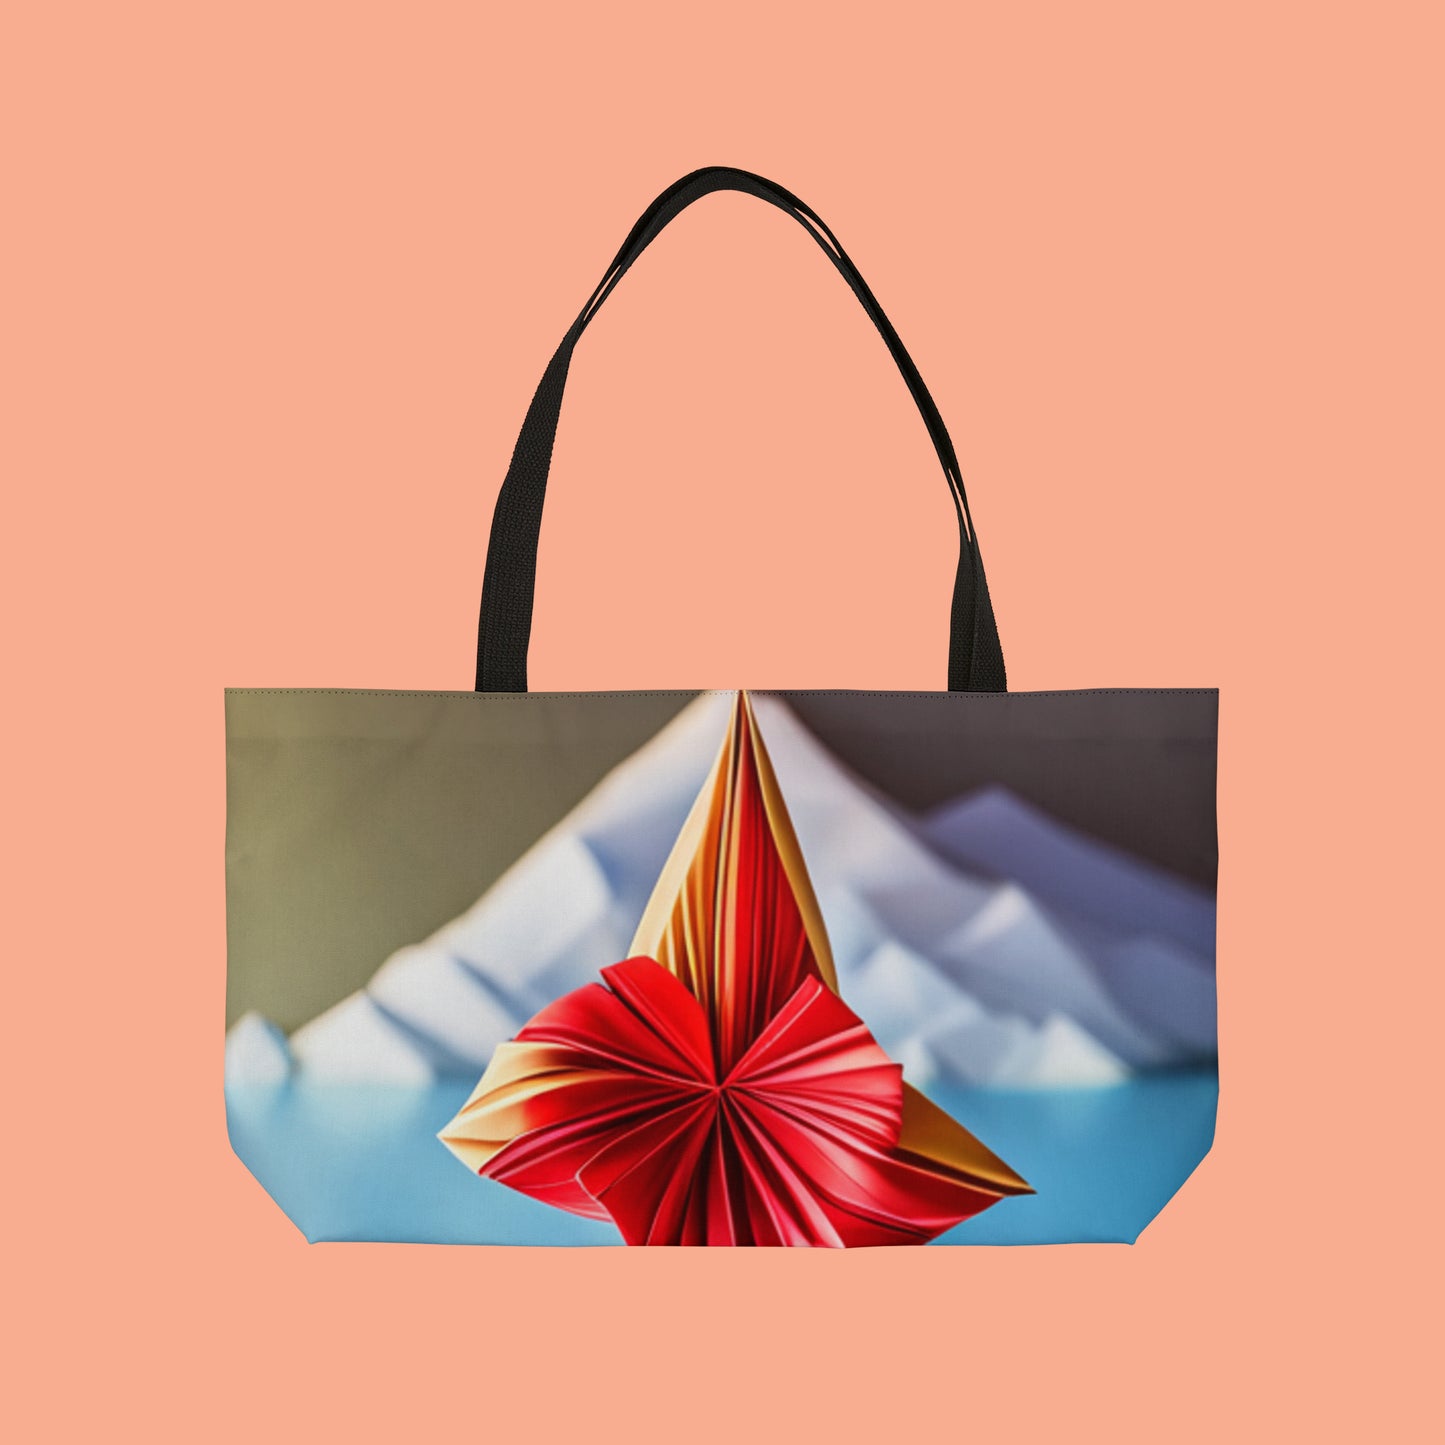 Amaryllis and Origami inspired style design on this Weekender Tote Bag.